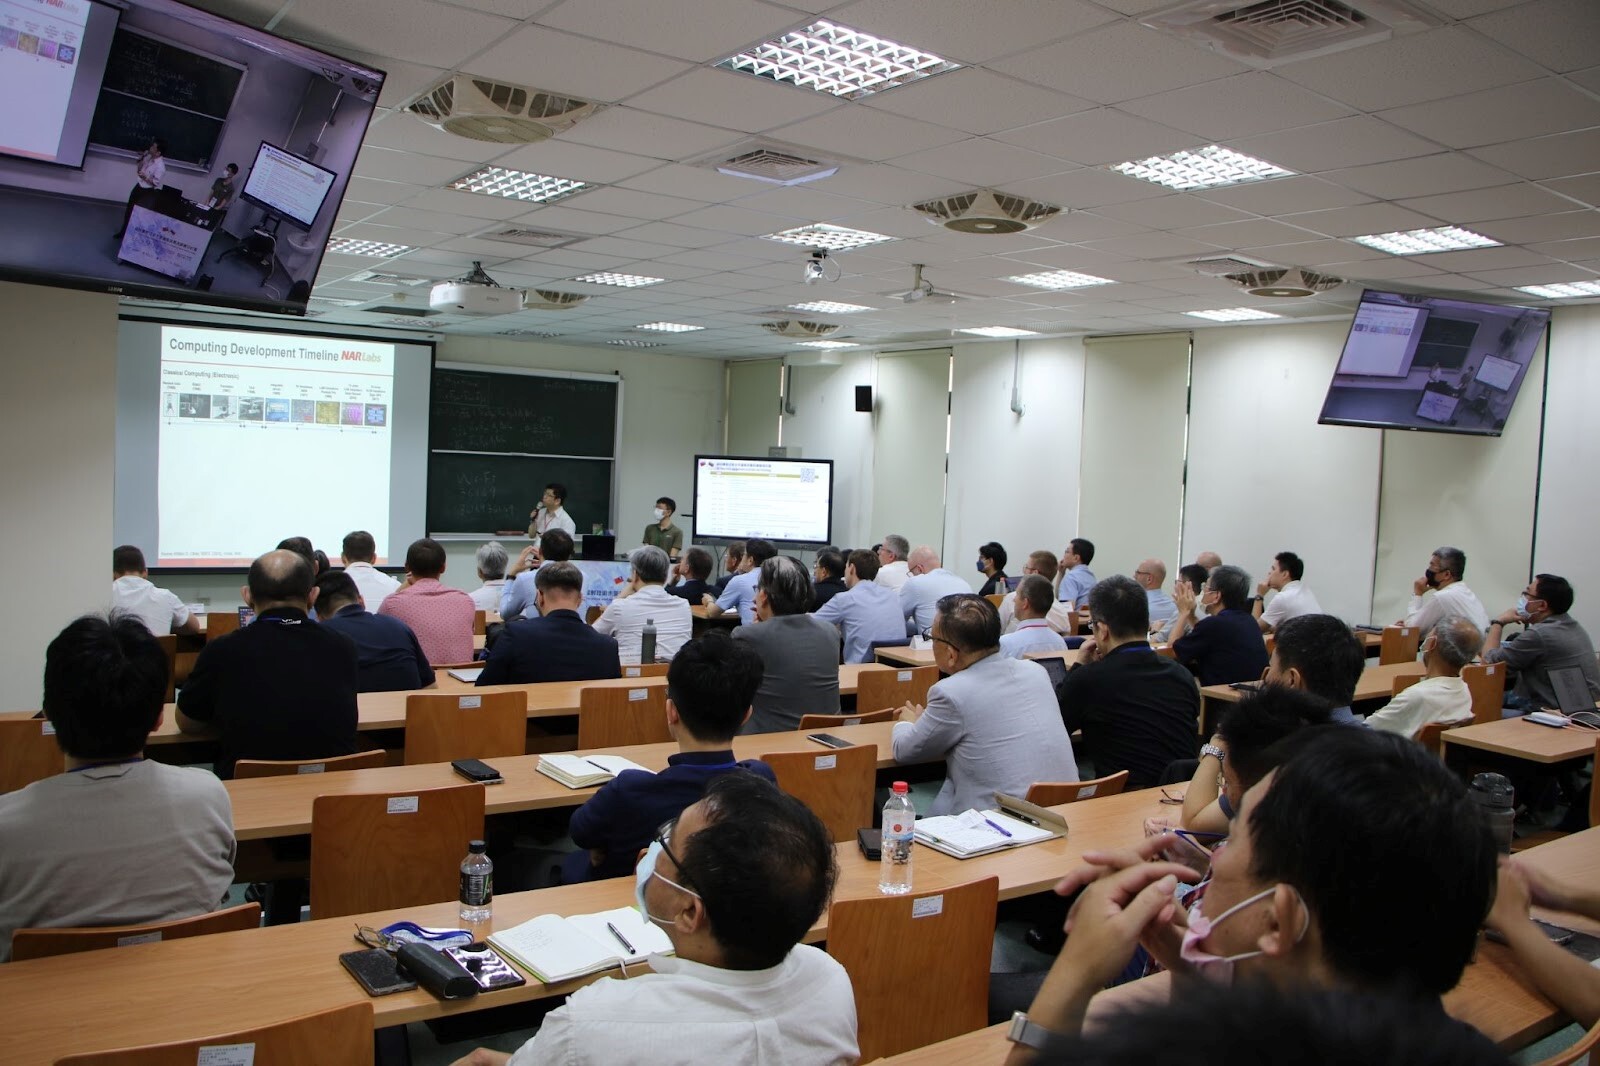 The development and challenges for future semiconductor chips was presented by TSRI director Hann-Huei Tsai (蔡瀚輝)